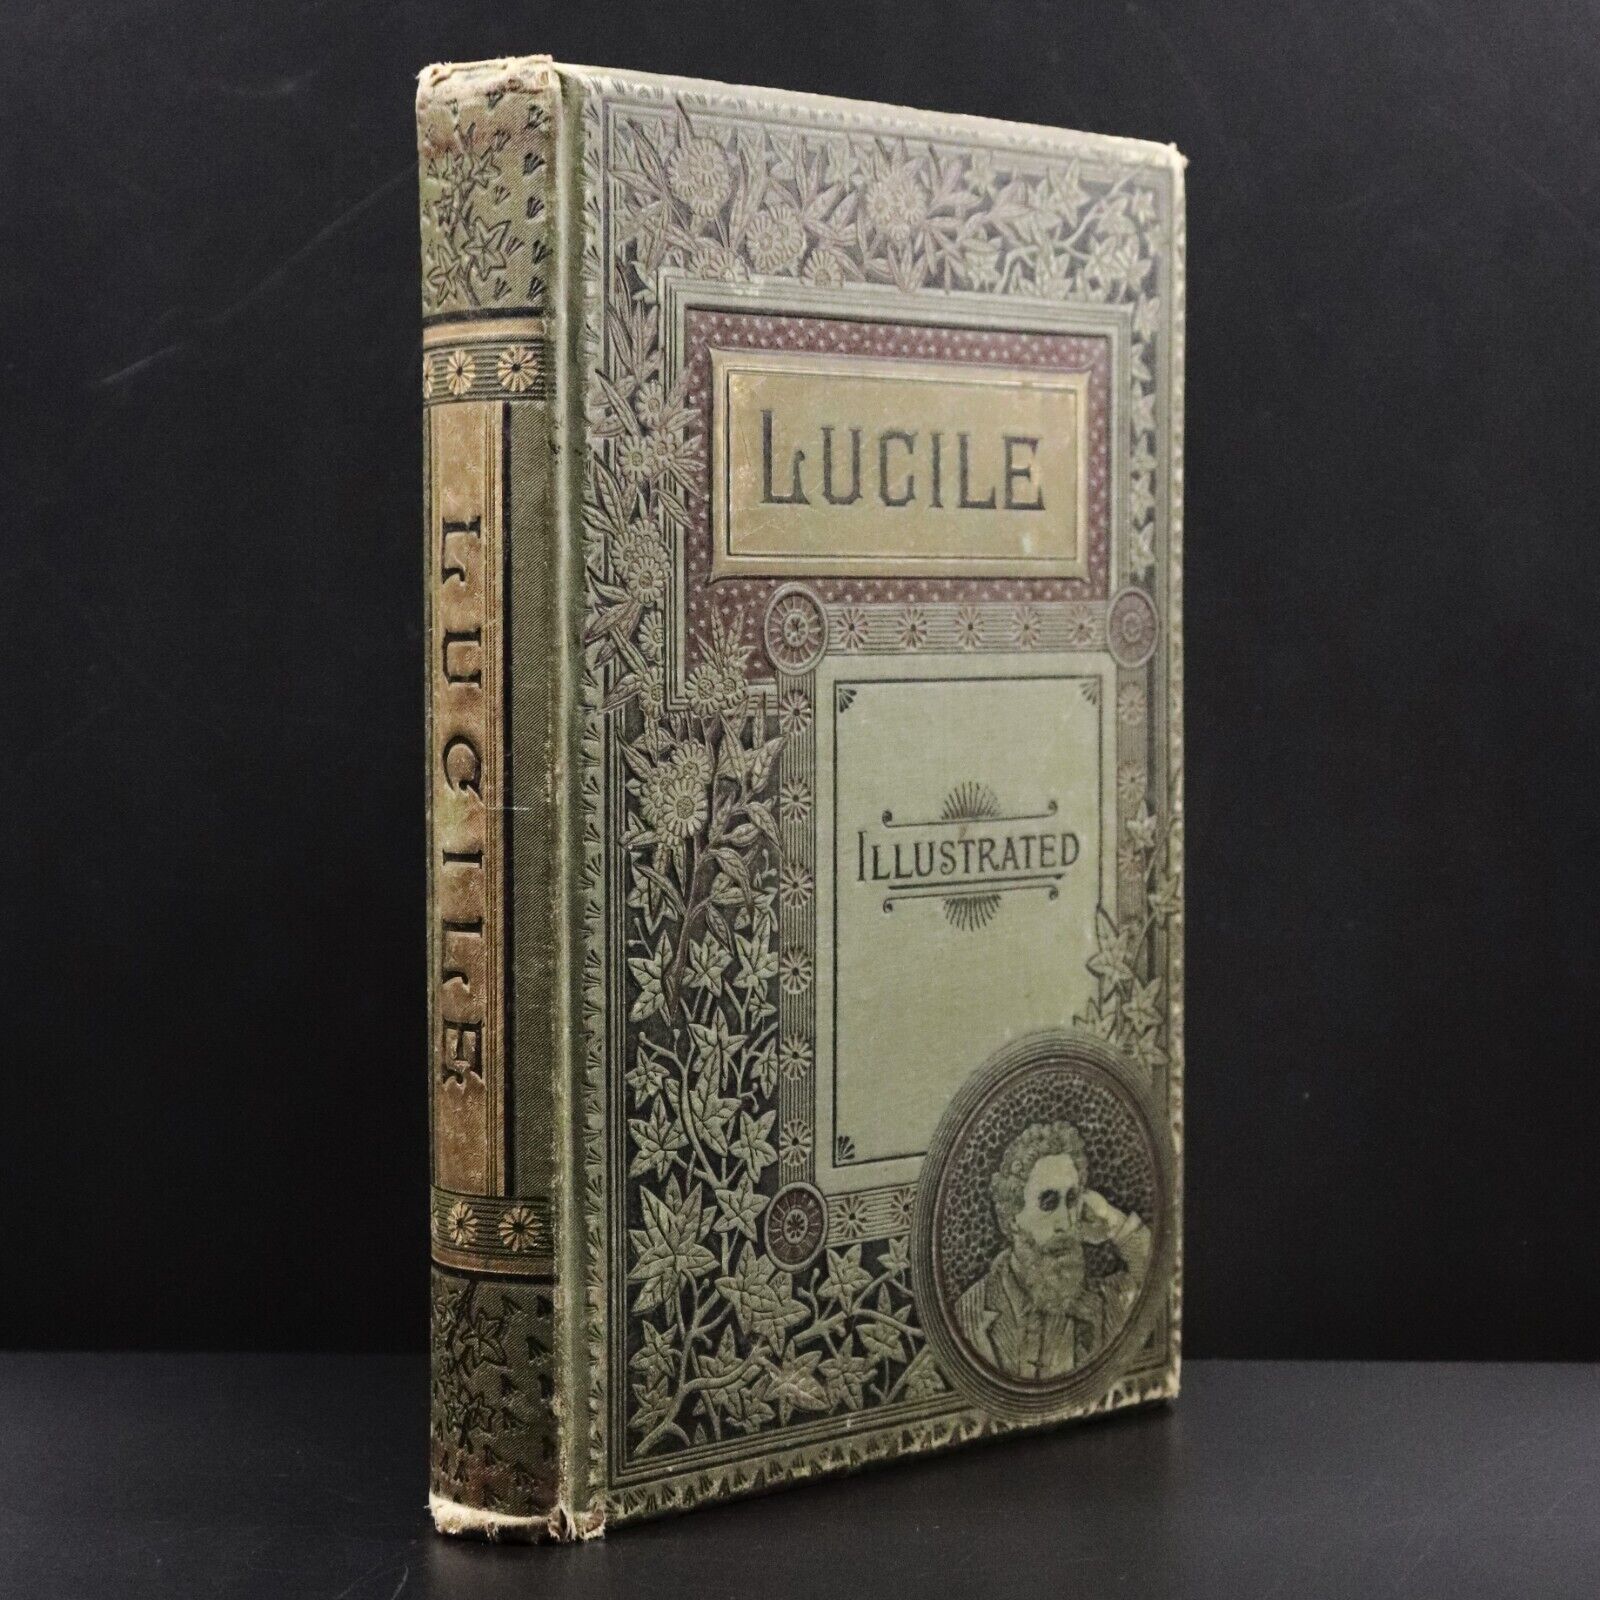 1885 Lucile by Owen Meredith Lord Lytton Antiquarian British Fiction Book